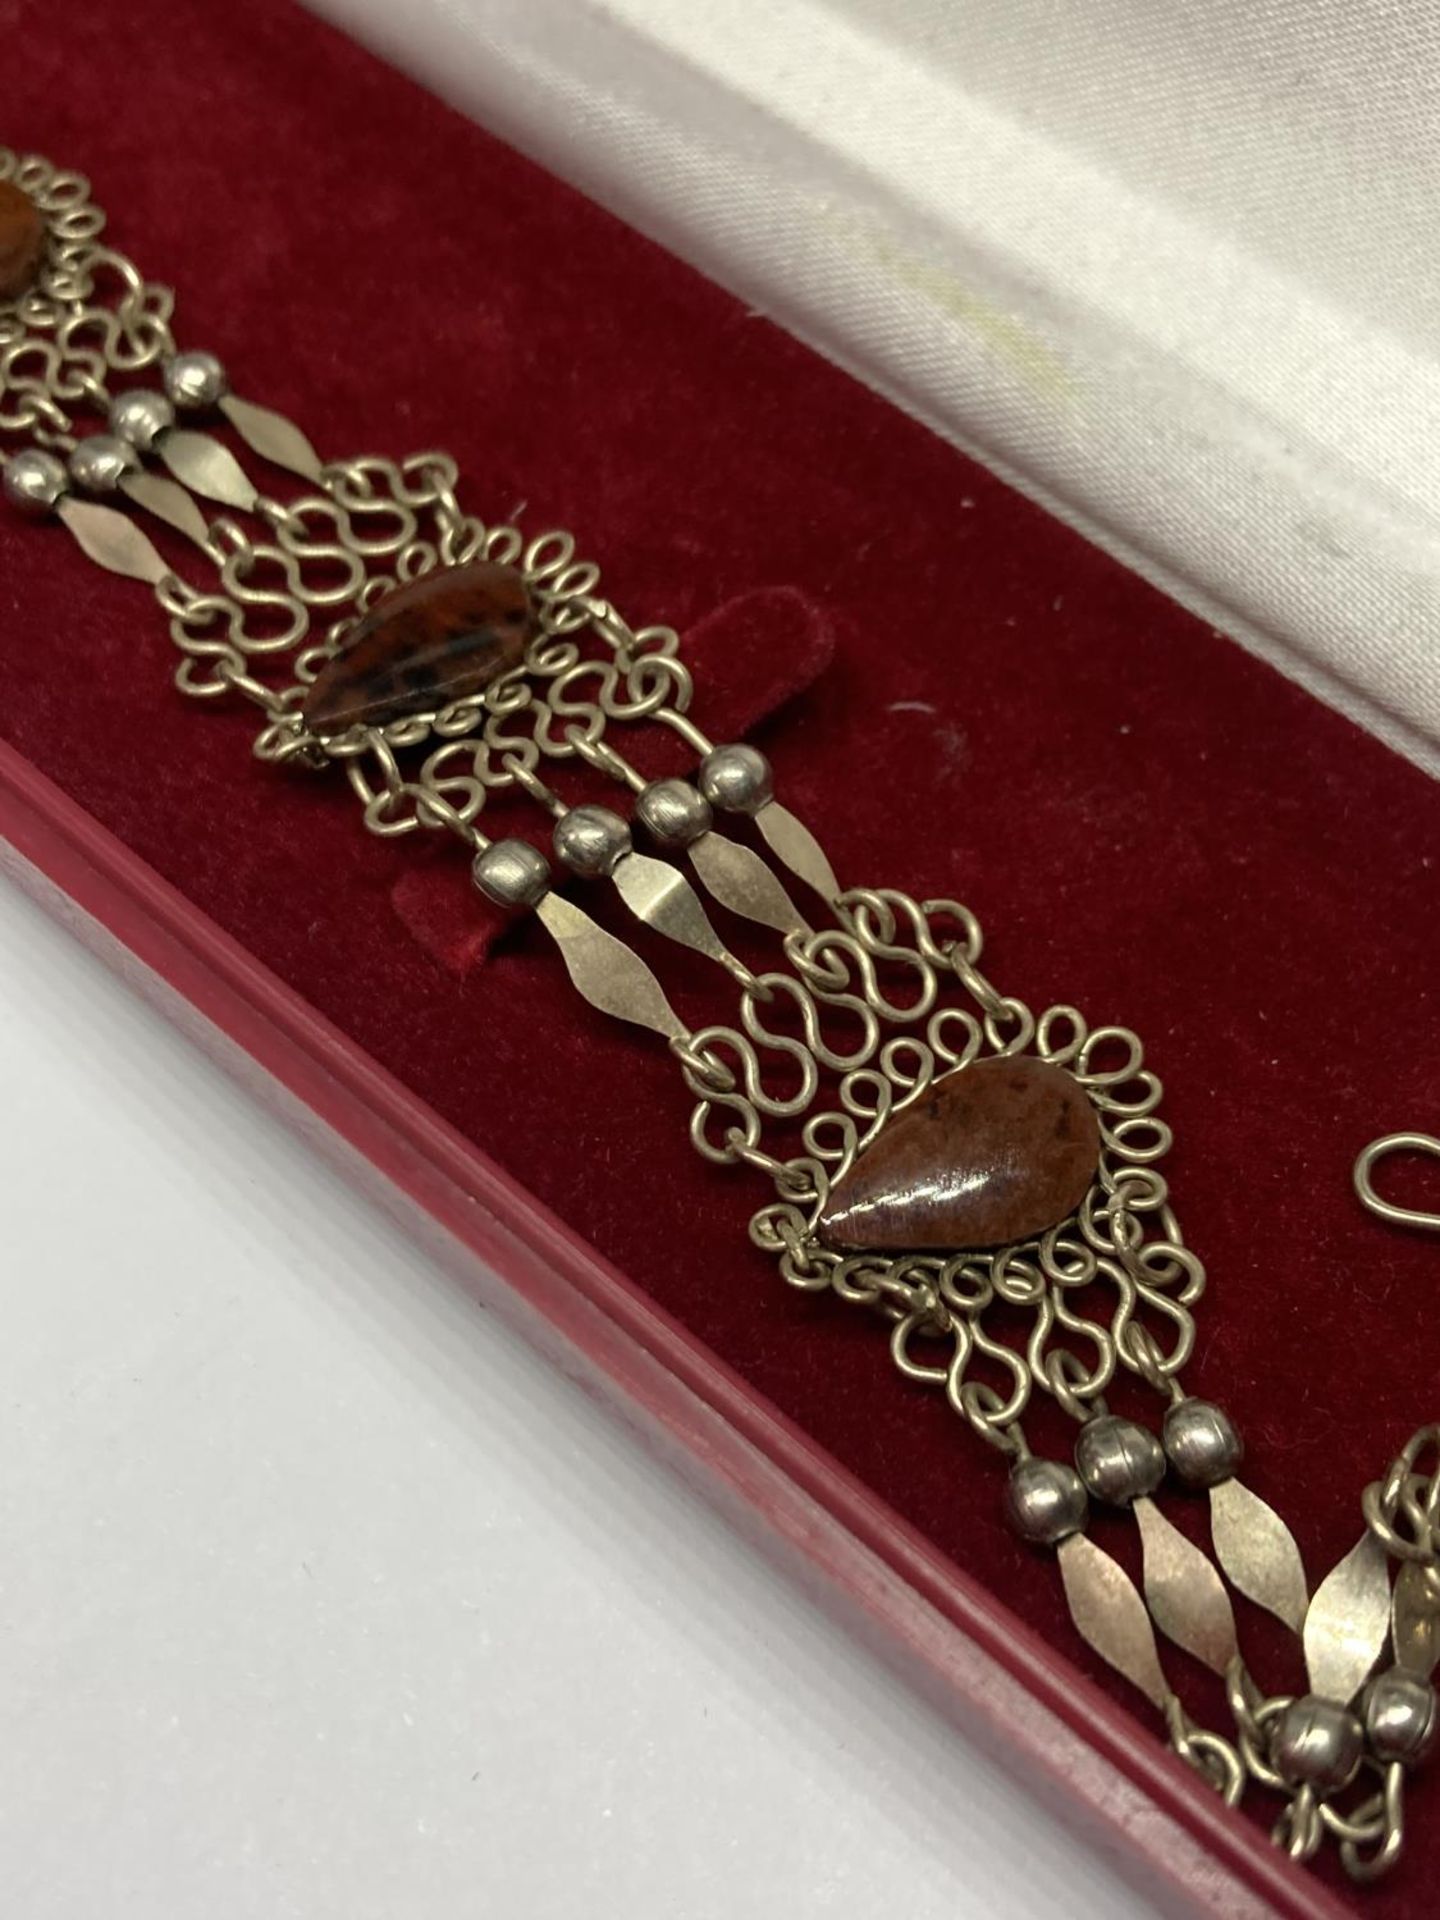 A LOW GRADE SILVER NECKLACE IN A PRESENTATION BOX - Image 2 of 3